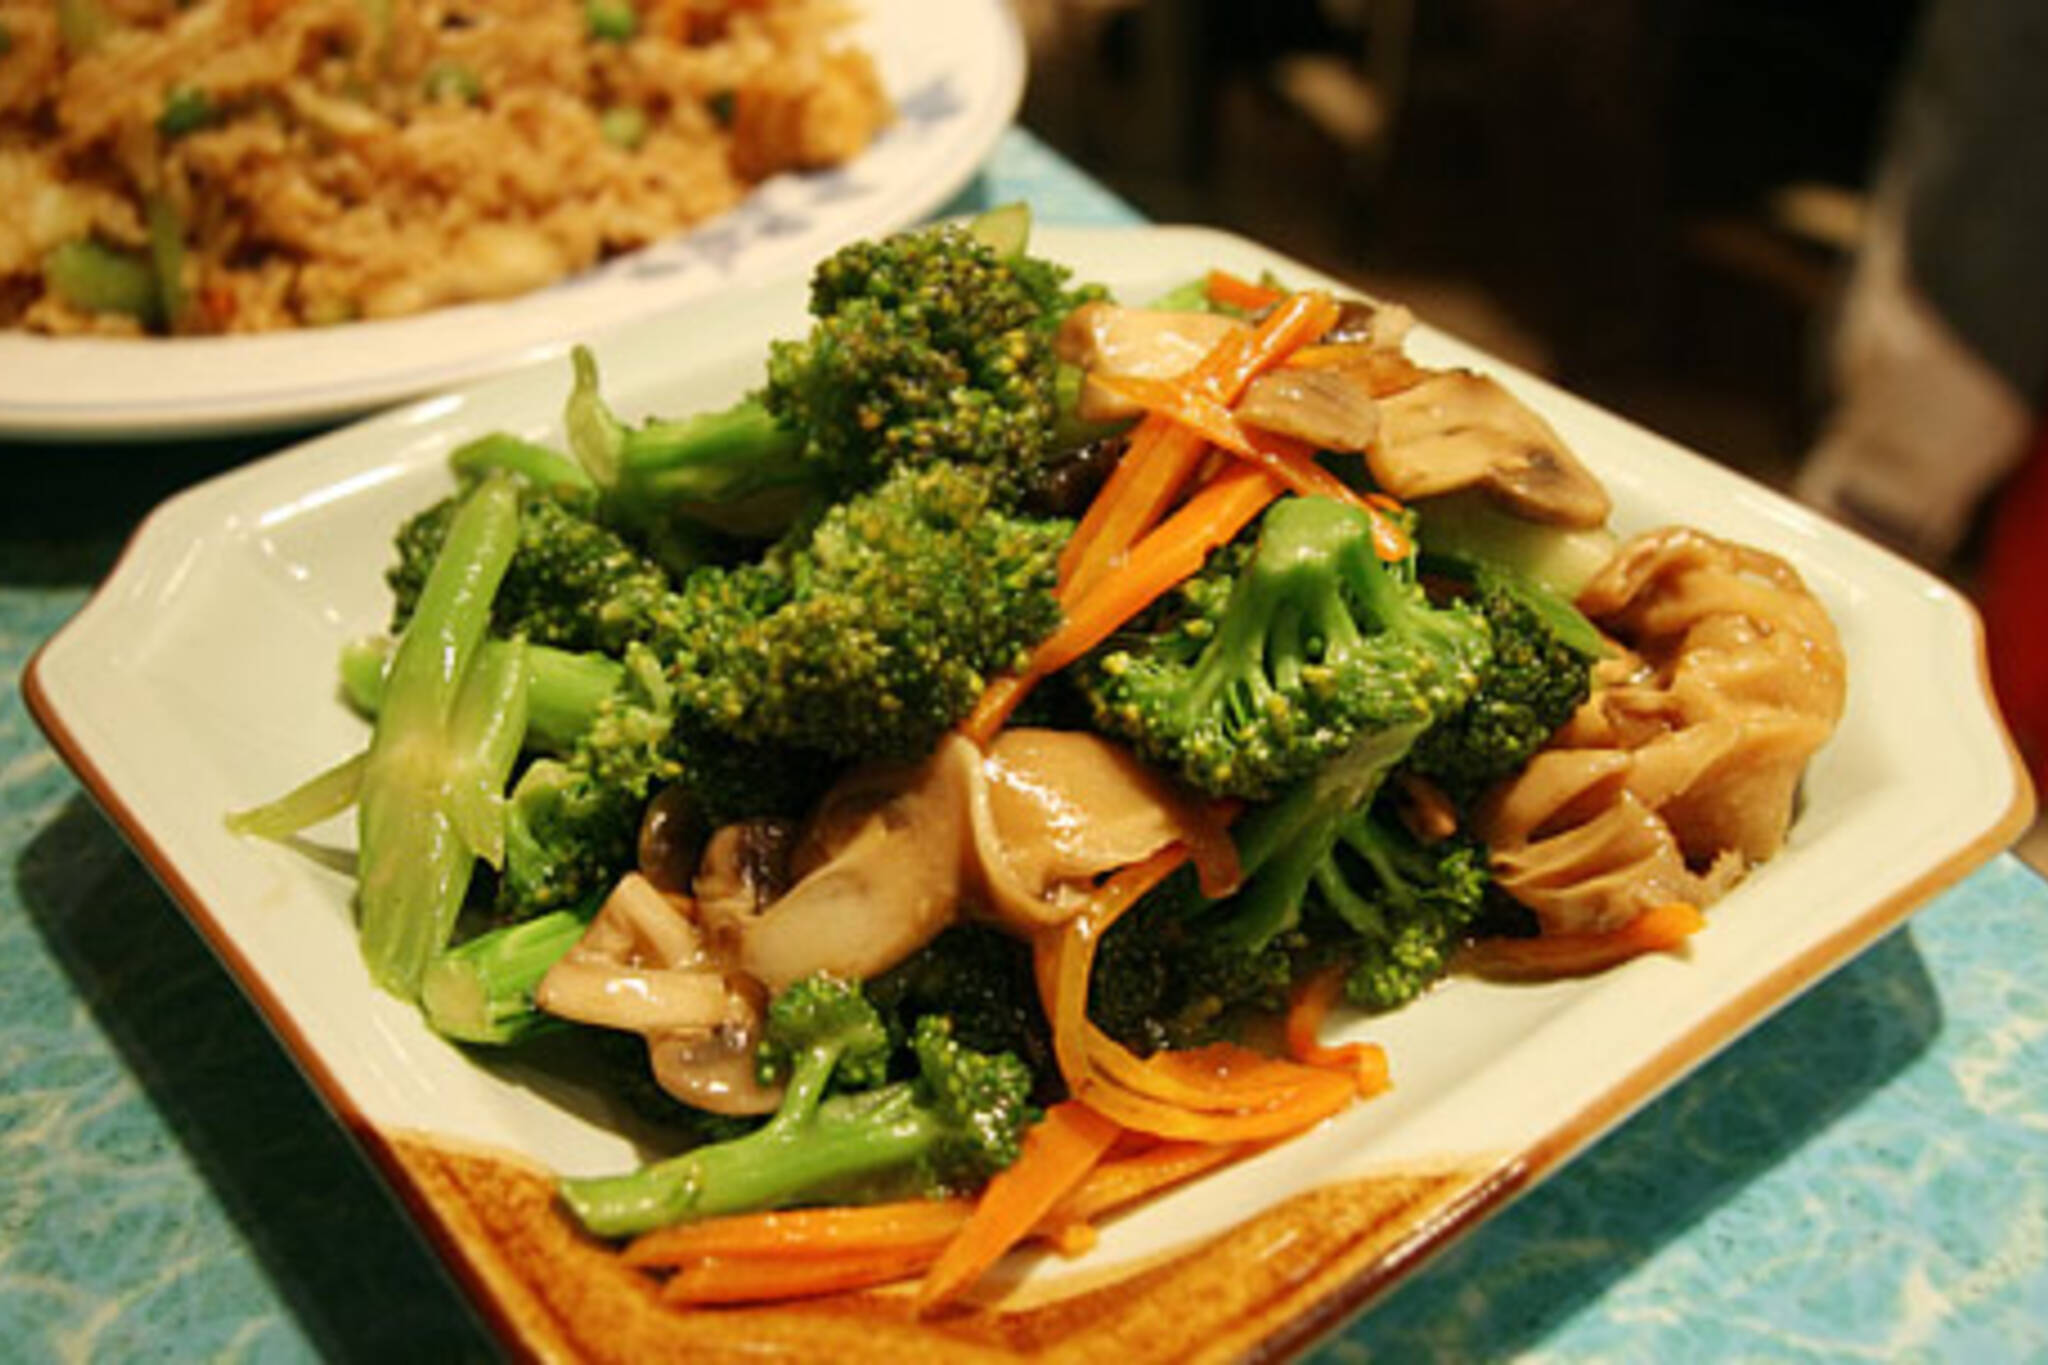 Broccoli and 3 Mushrooms at Cafe 668